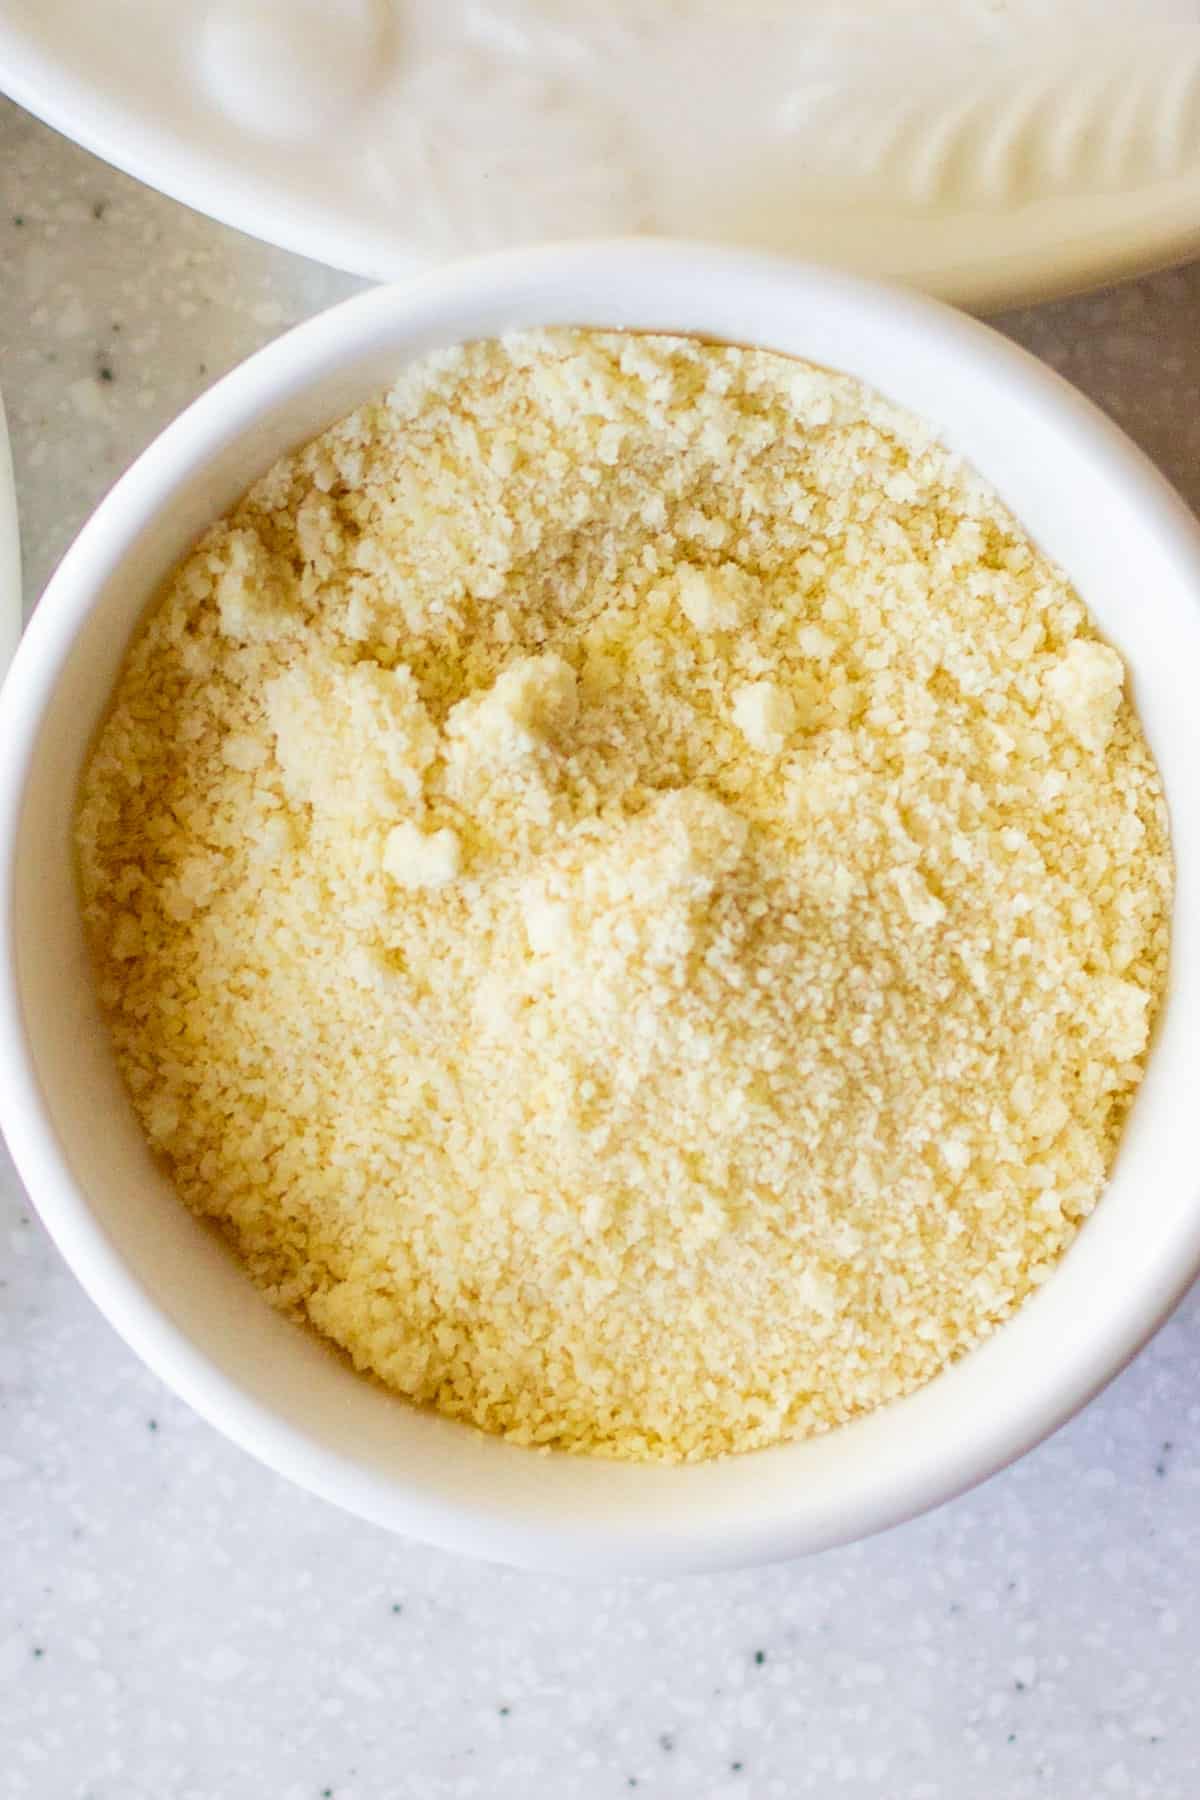 blanched almond flour in white bowl